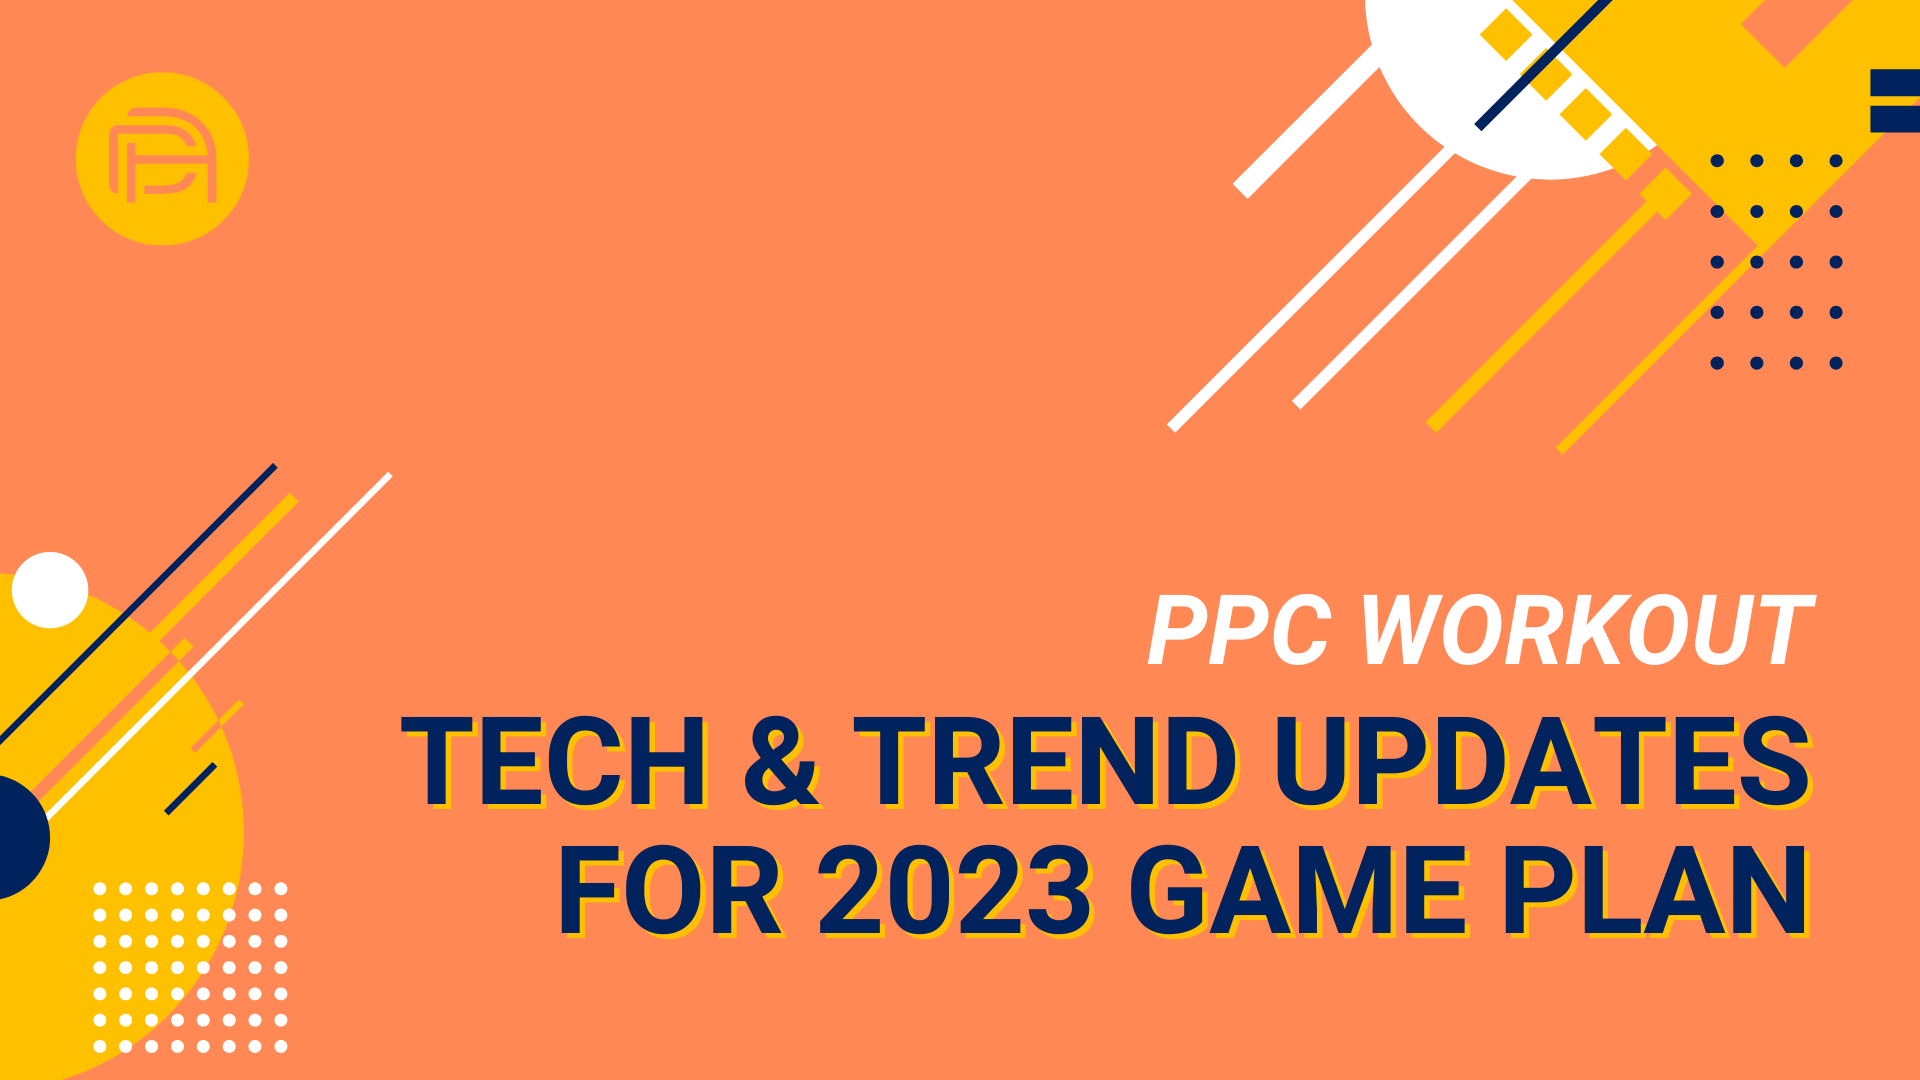 PPC Workout: Tech & Trend Updates for 2023 Game Plan